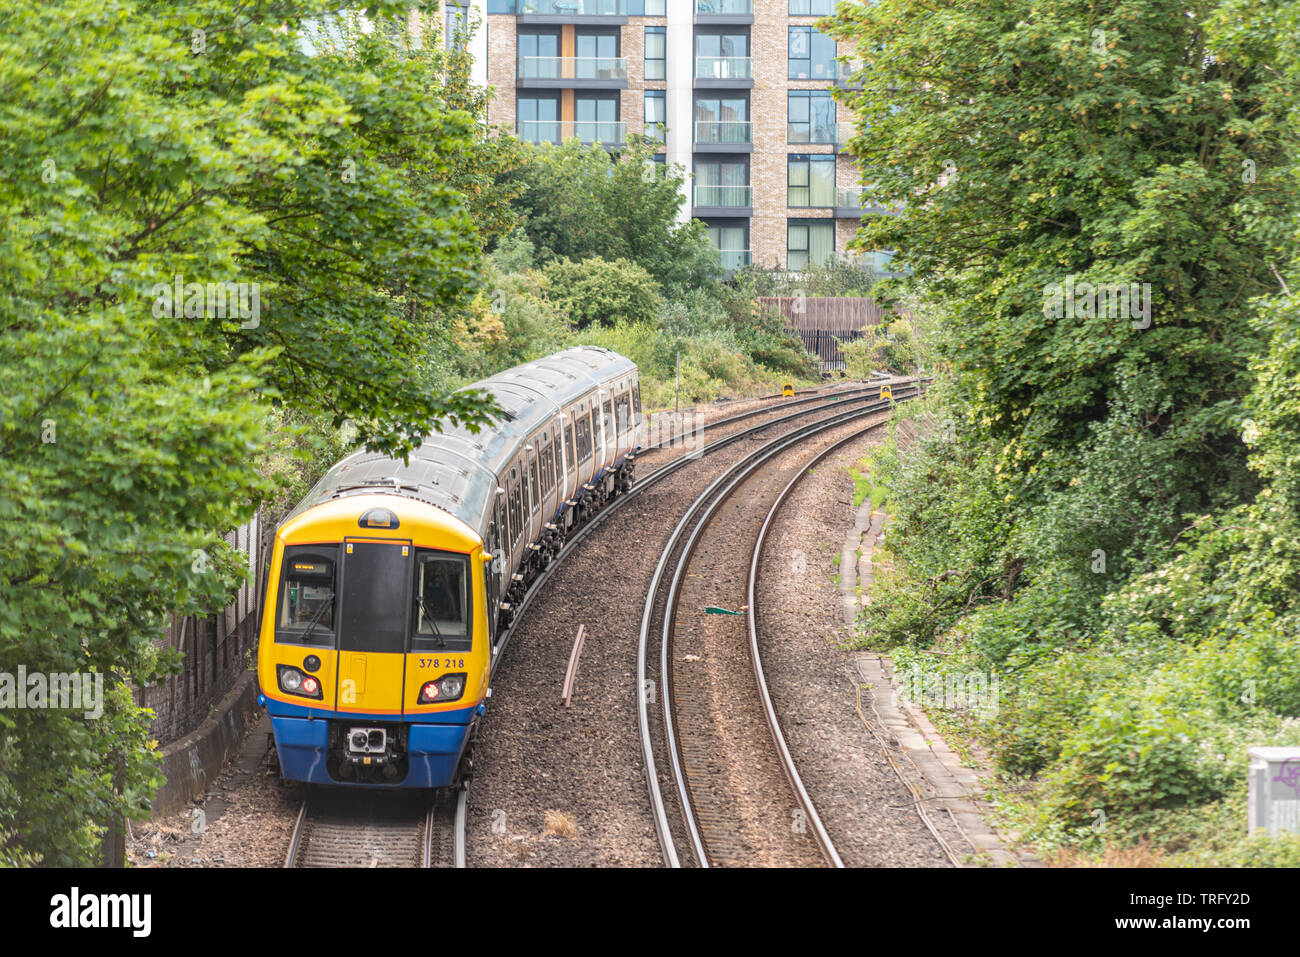 British Rail Class 378 Capitalstar electric multiple unit passenger train, specifically designed for the London Overground network, in Chelsea, UK Stock Photo